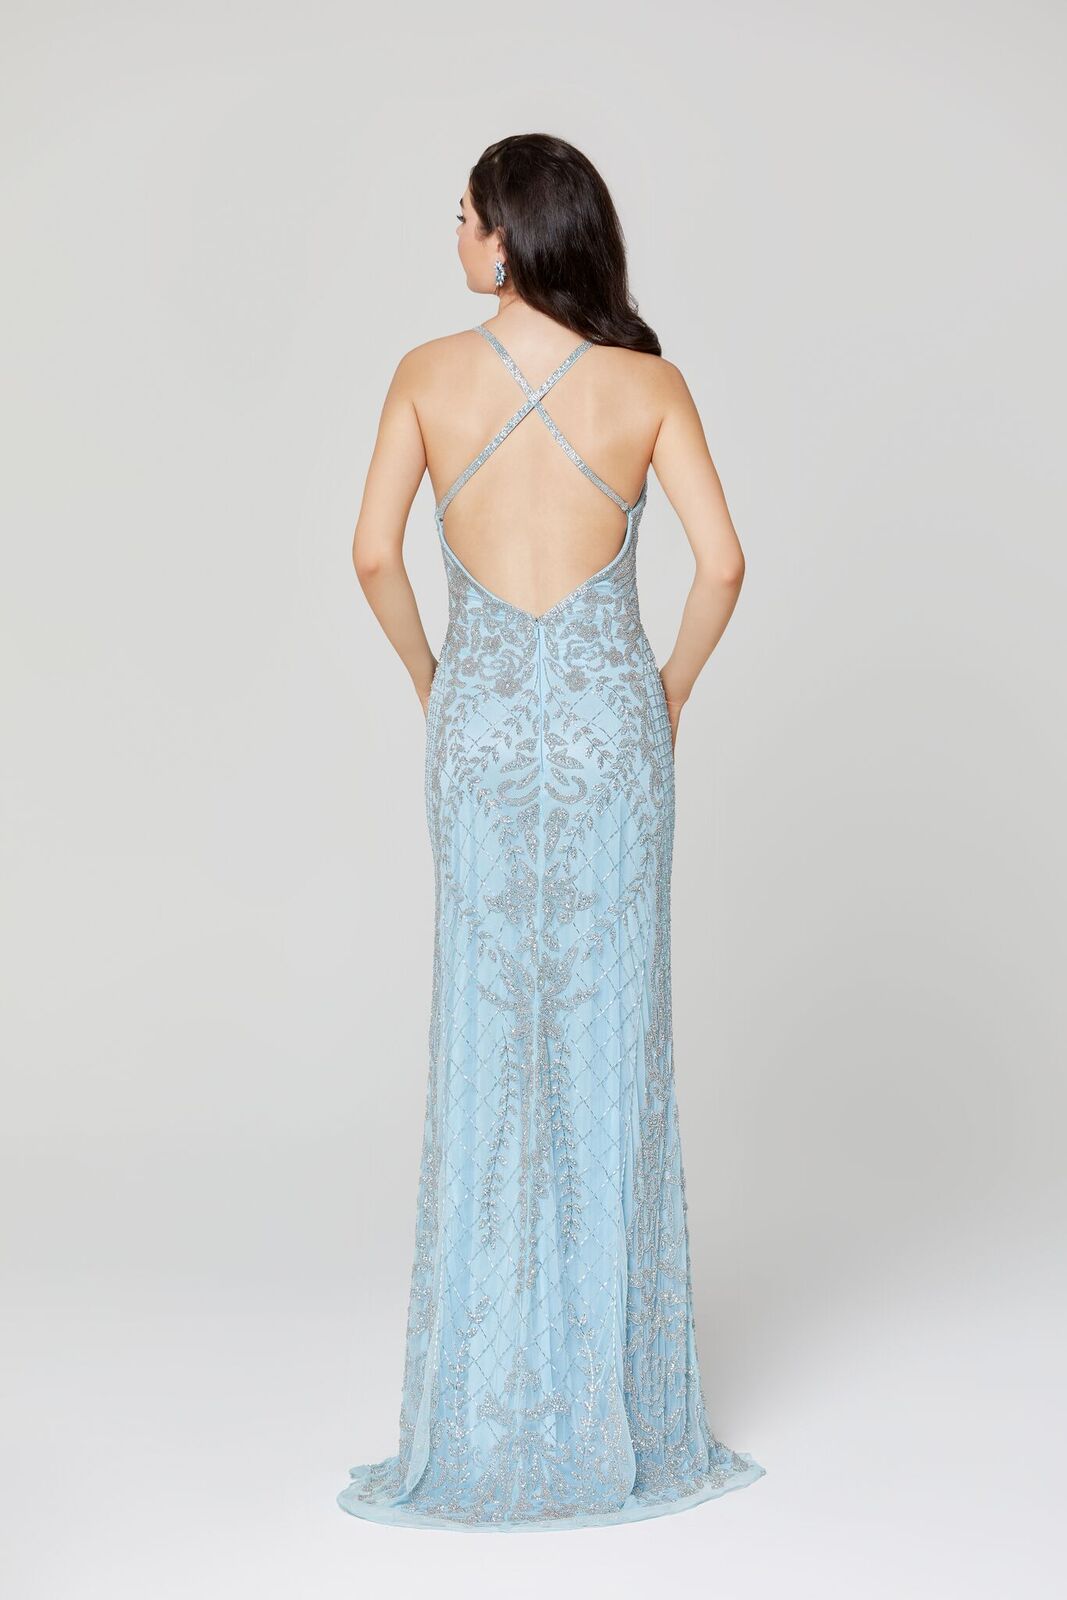 Primavera Couture 3428 is a beaded sequins Prom Dress, Pageant Gown, Wedding Dress & Formal Evening Wear gown. This Gown Features a v neckline with spaghetti straps that criss cross in the open back 